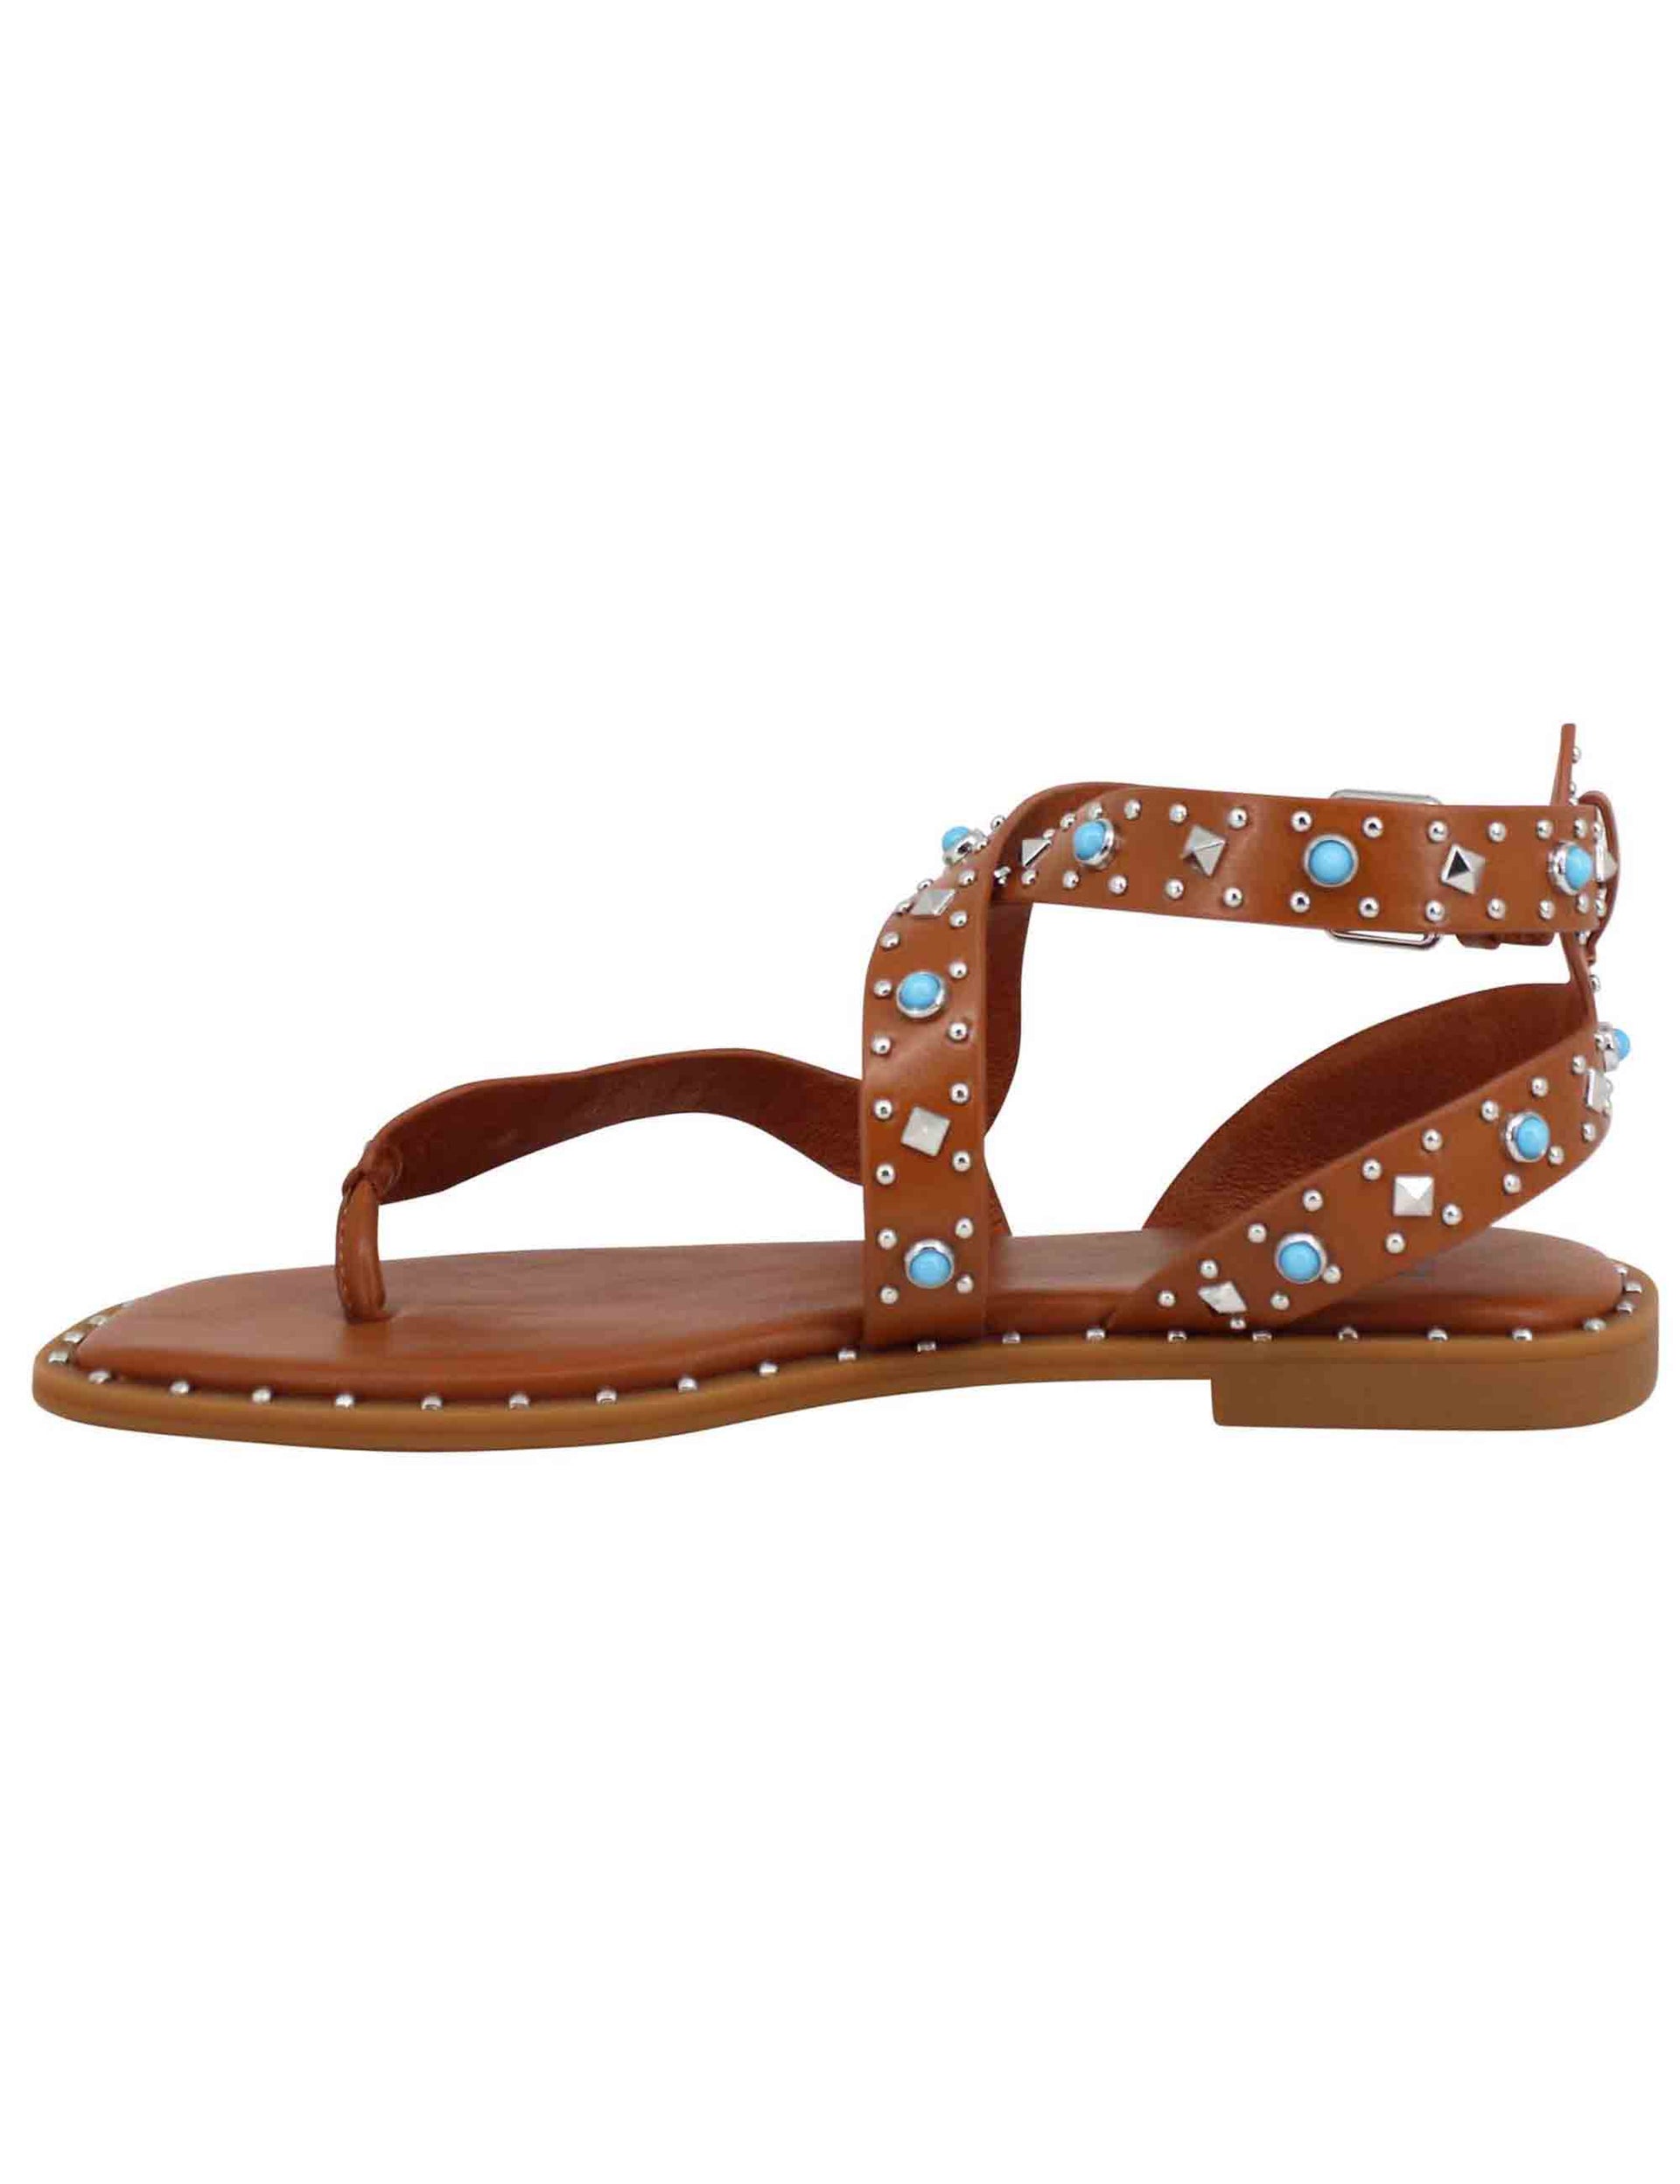 Women's flat sandals in eco leather with rhinestones and studs with Petra ankle strap